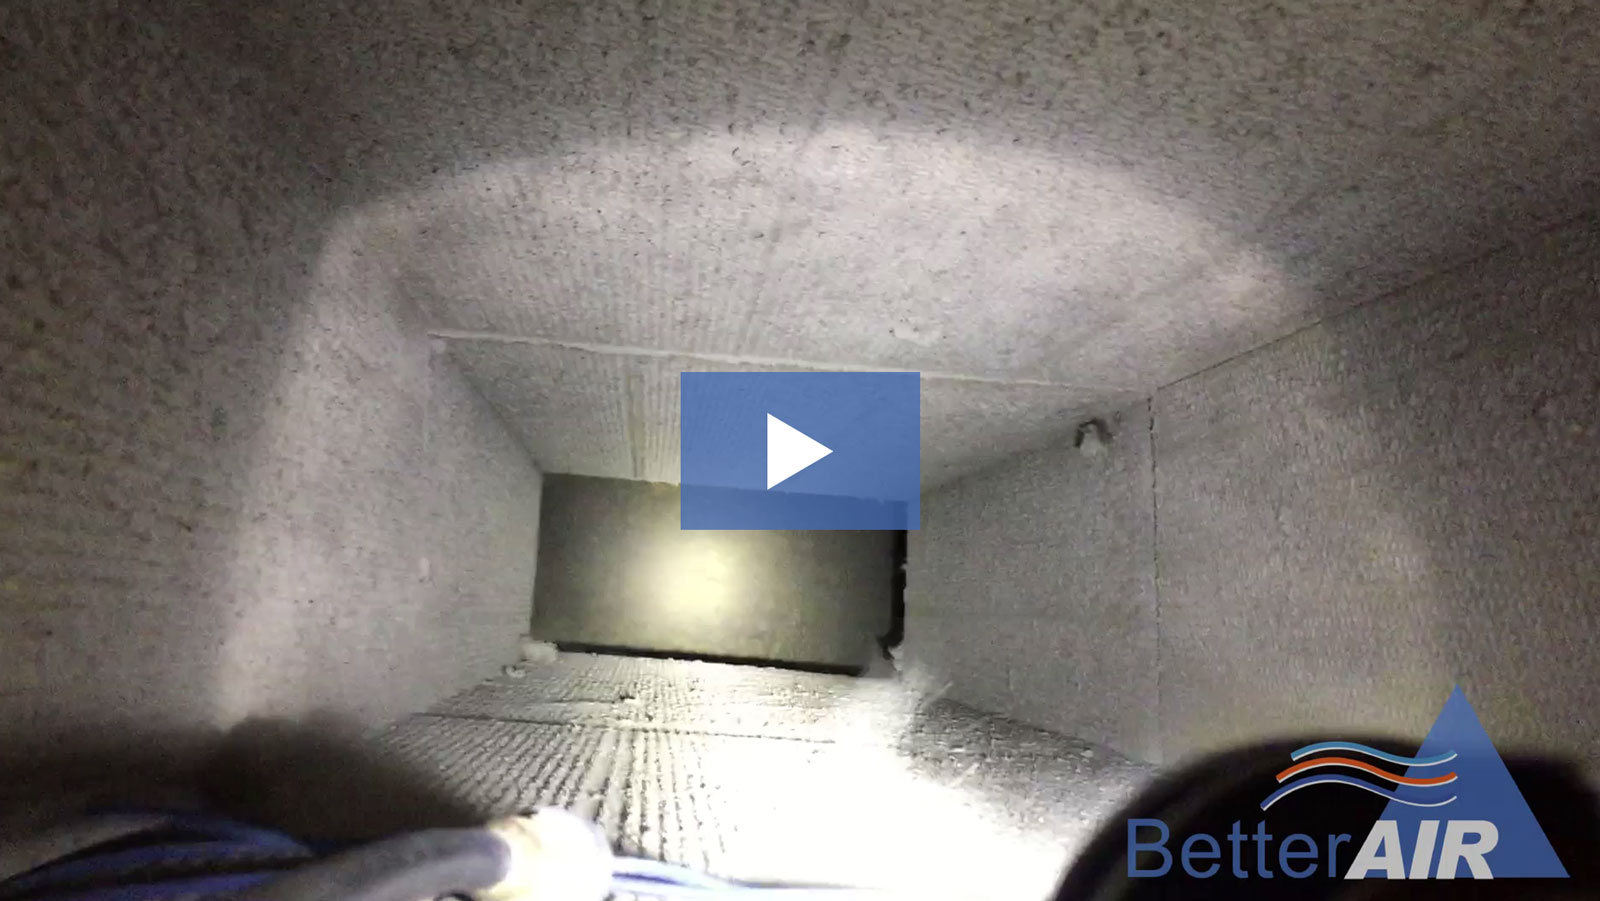 VIDEO: Our technician busy with Fiber Air Glass Duct cleaning